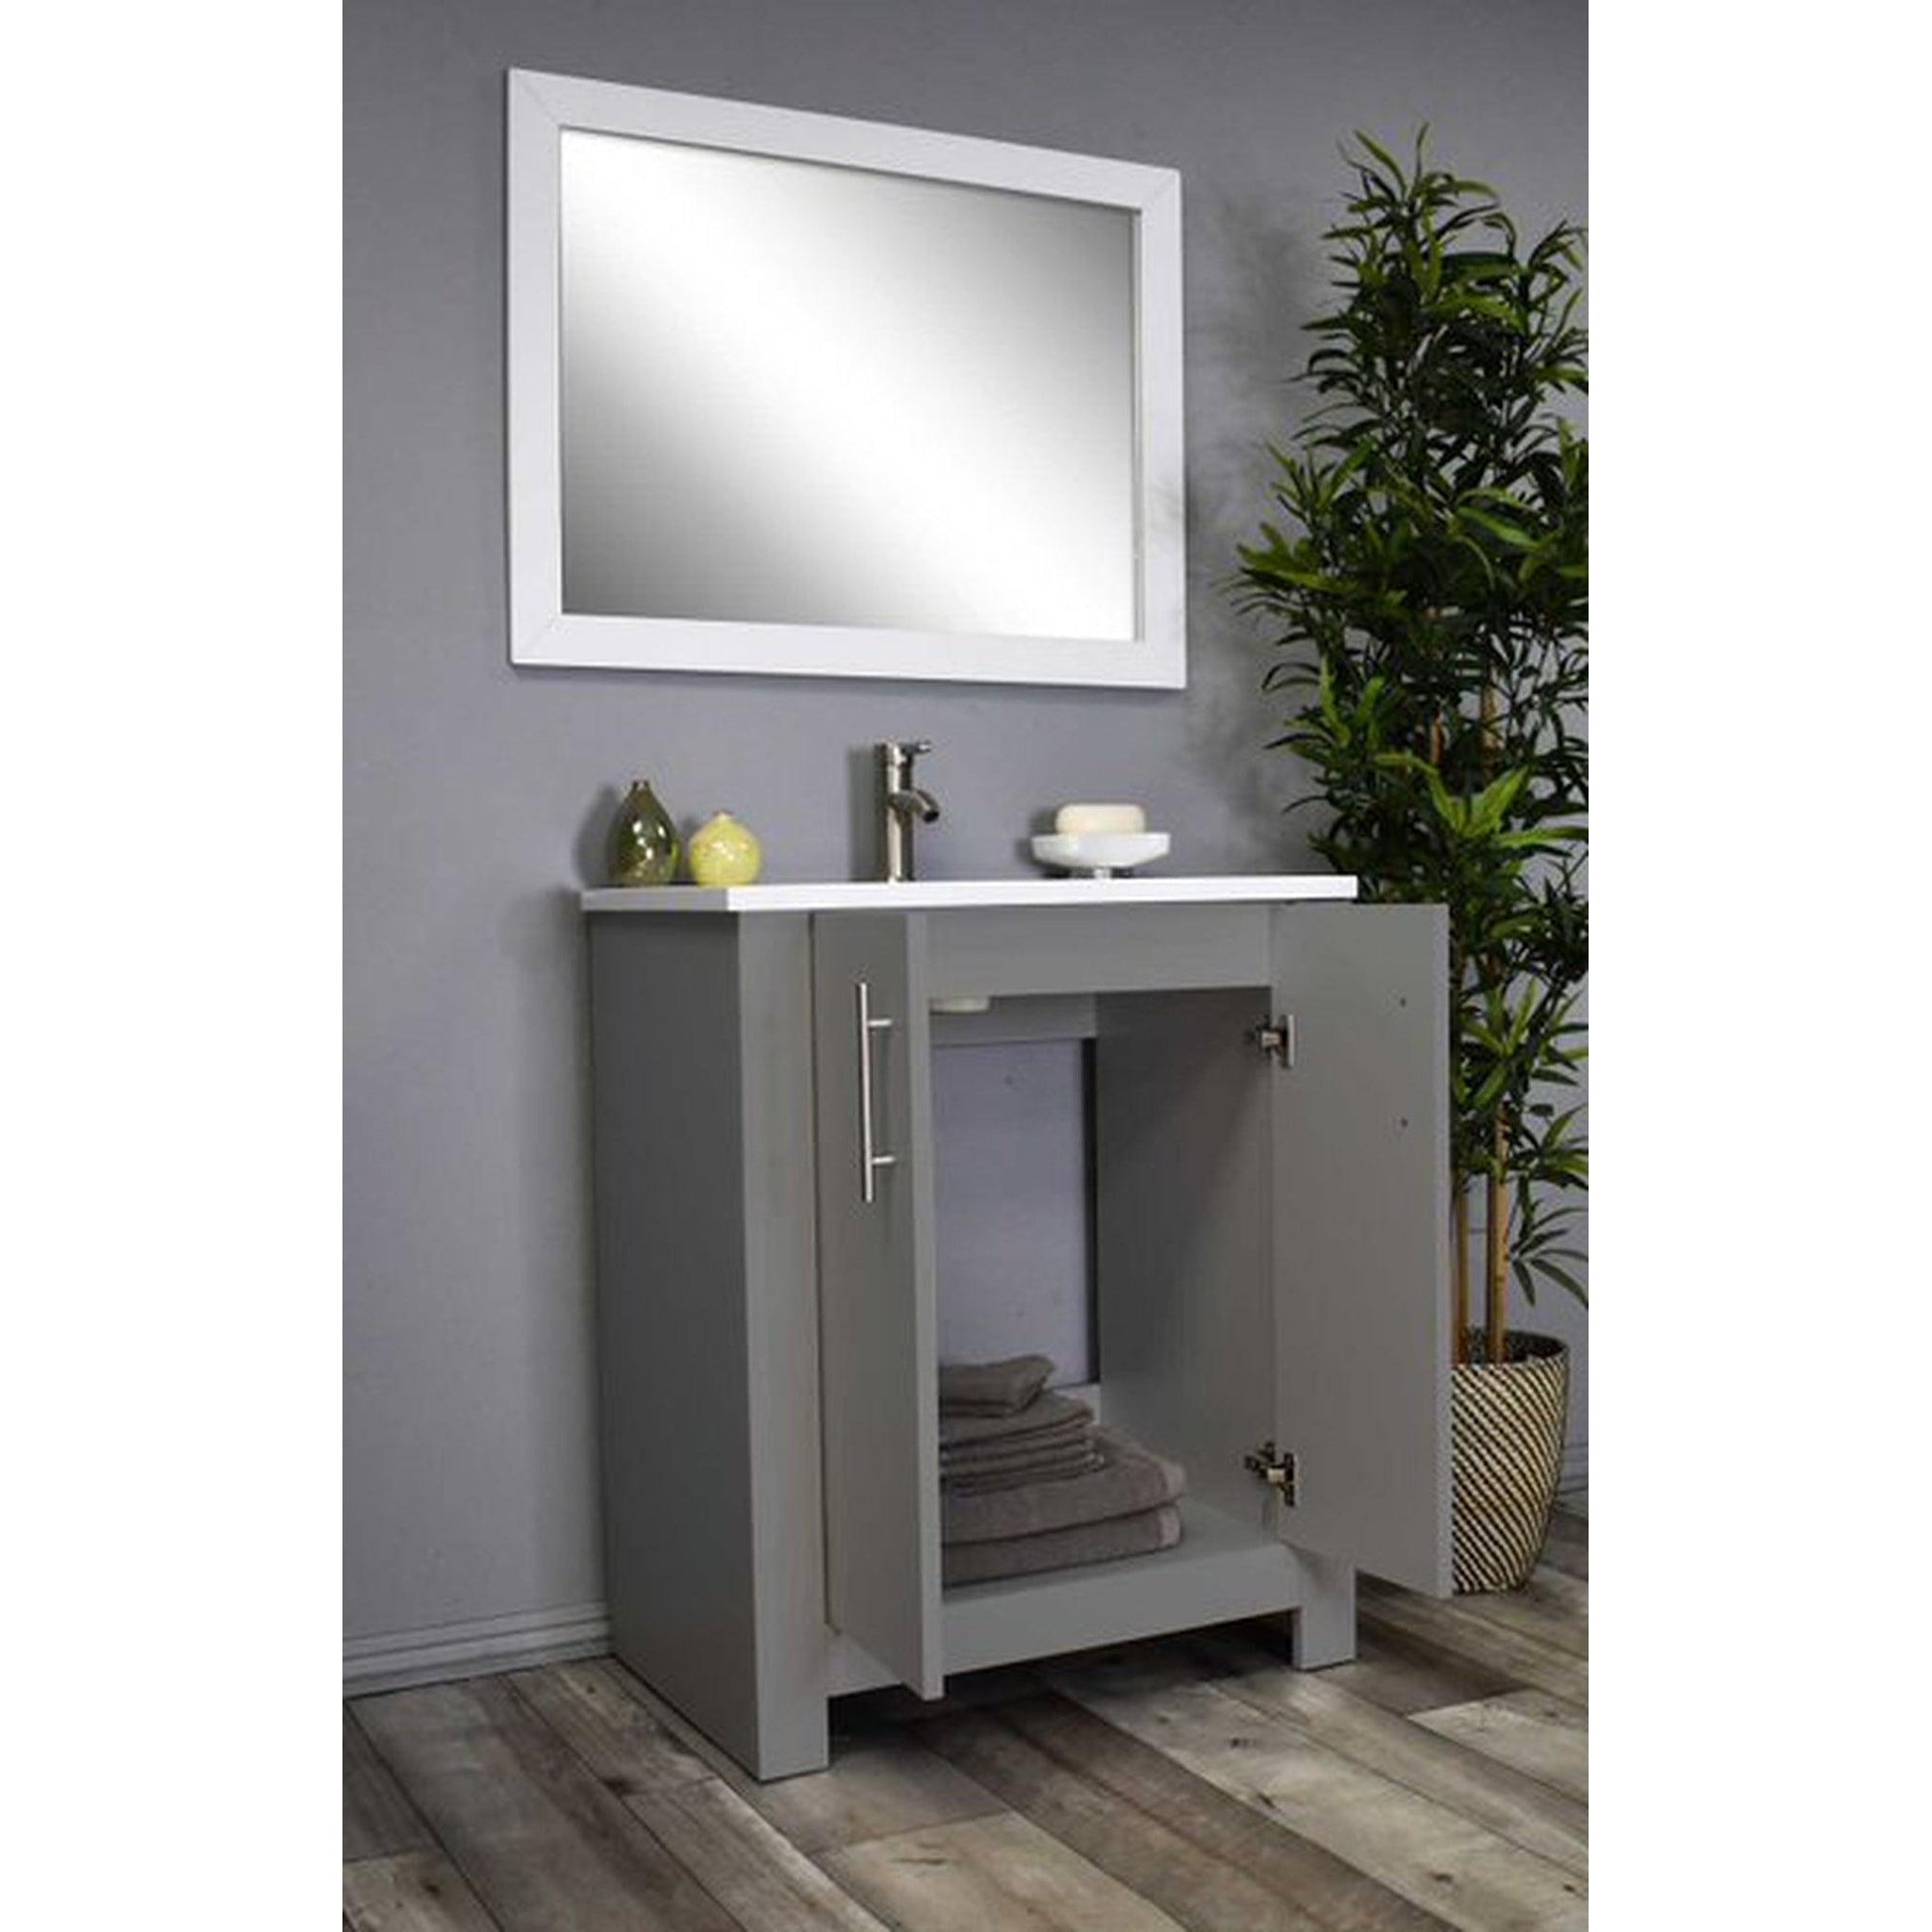 Volpa USA Austin 24" x 20" Gray Modern Freestanding Bathroom Vanity With Acrylic Top, Integrated Acrylic Sink And Brushed Nickel Handles